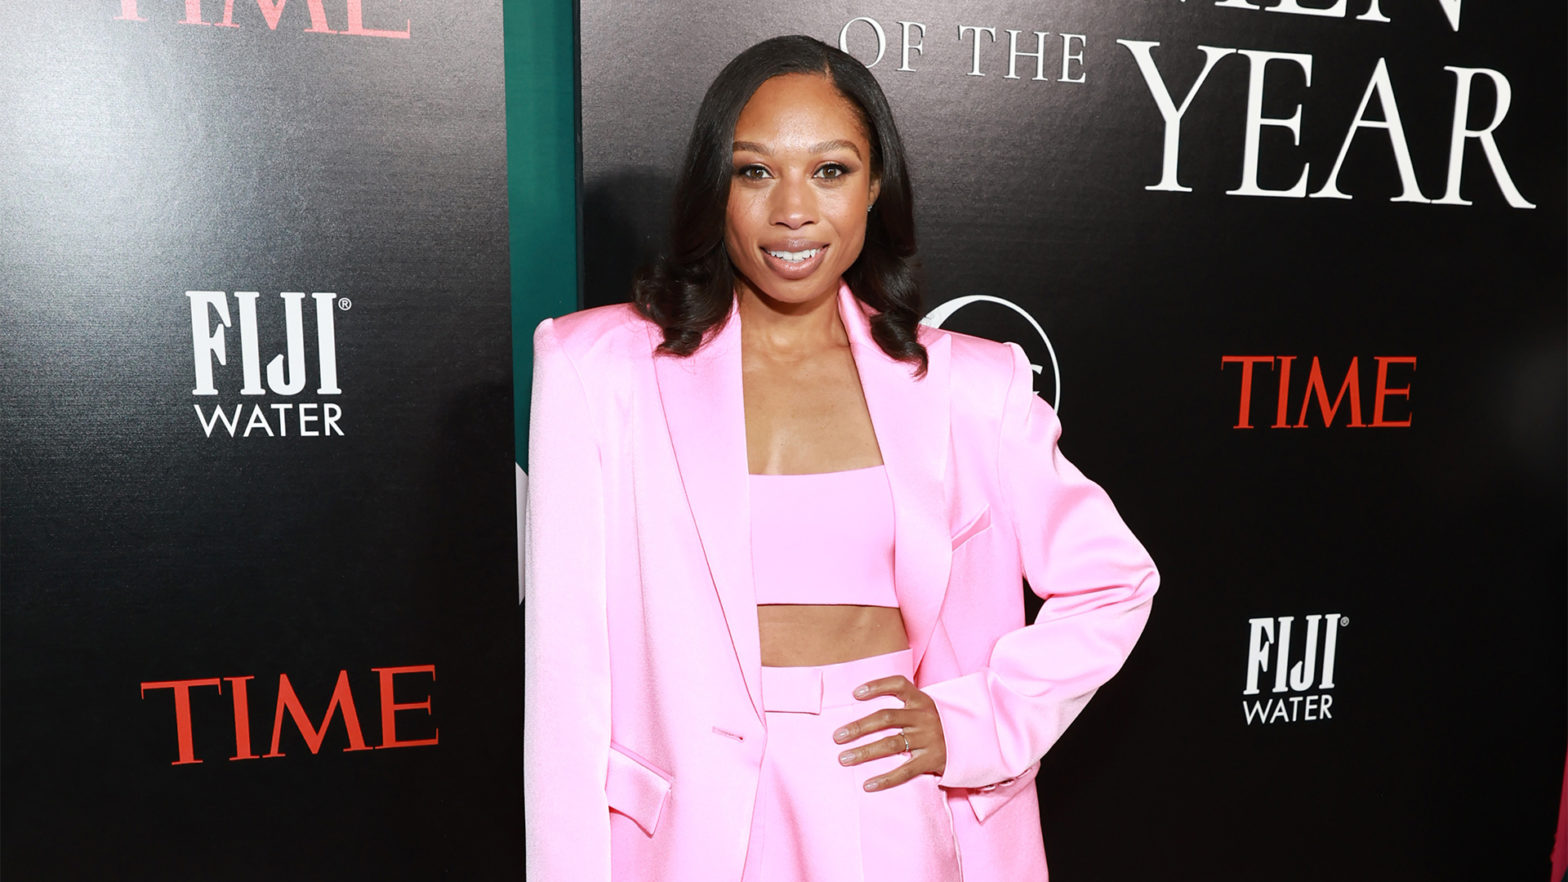 Allyson Felix's Saysh Brand Raises Millions Of Dollars In An Aim To Build A 'Better Future For Women'